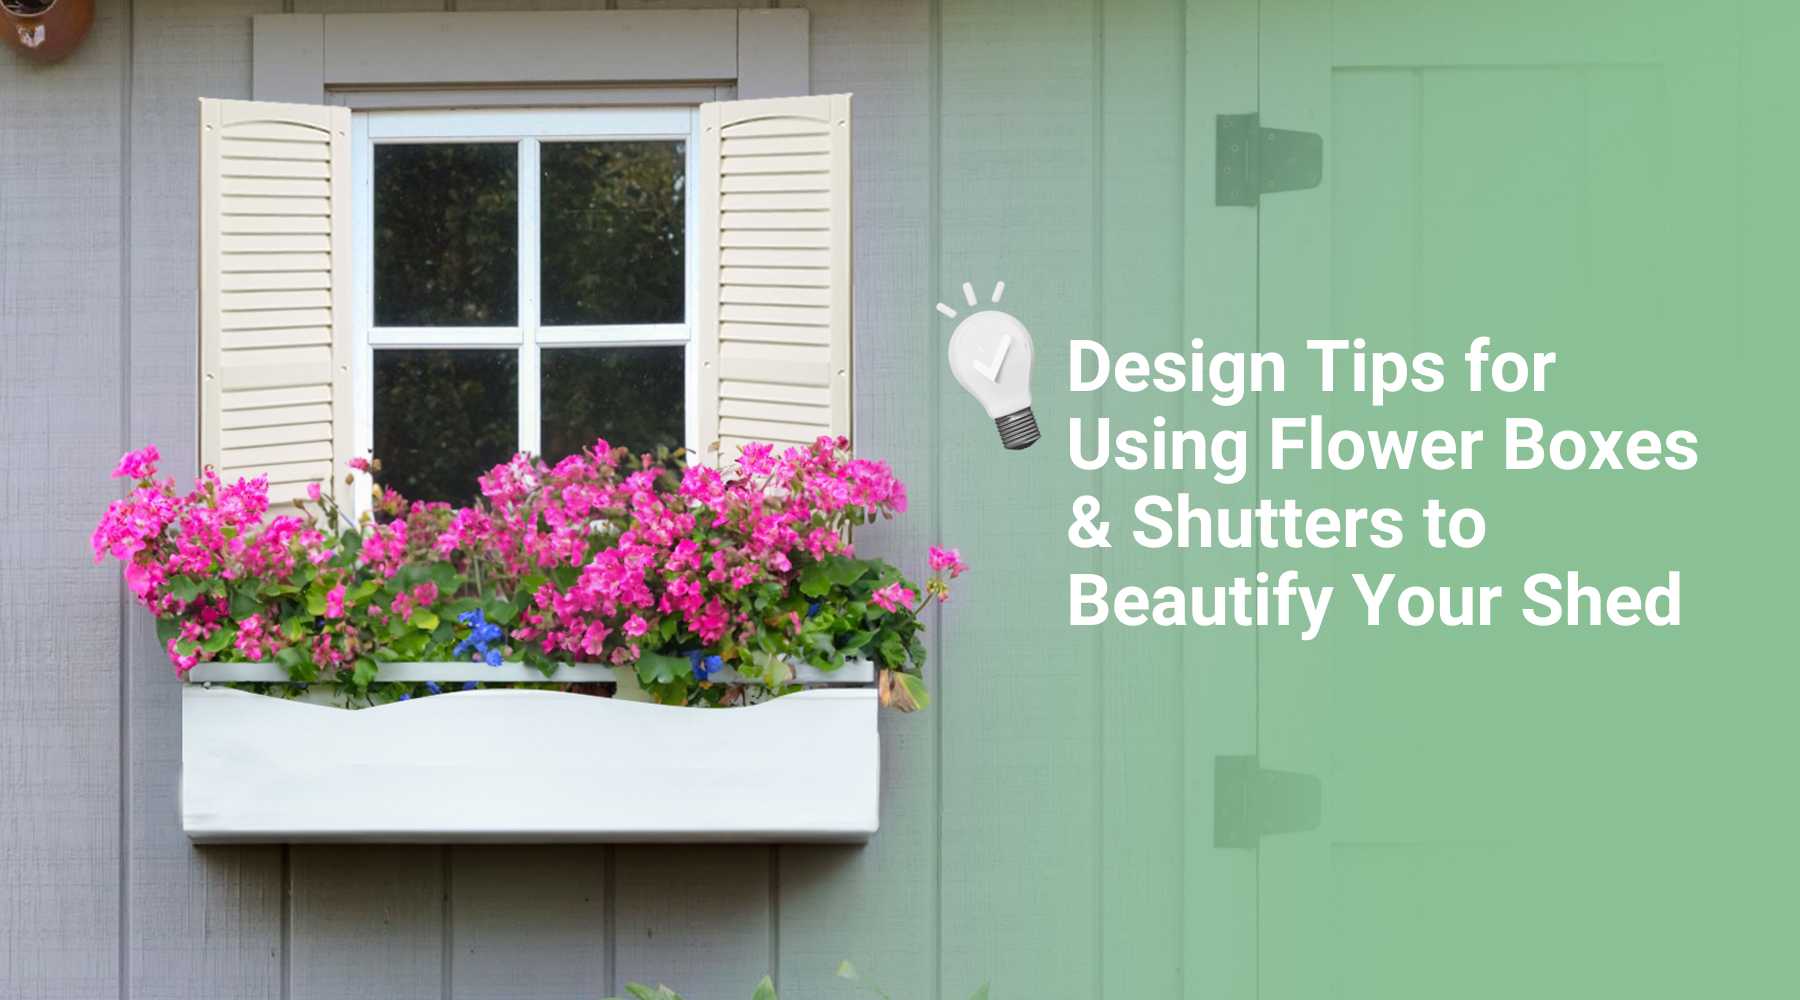 Design Tips for Using Flower Boxes & Shutters to Beautify Your Shed